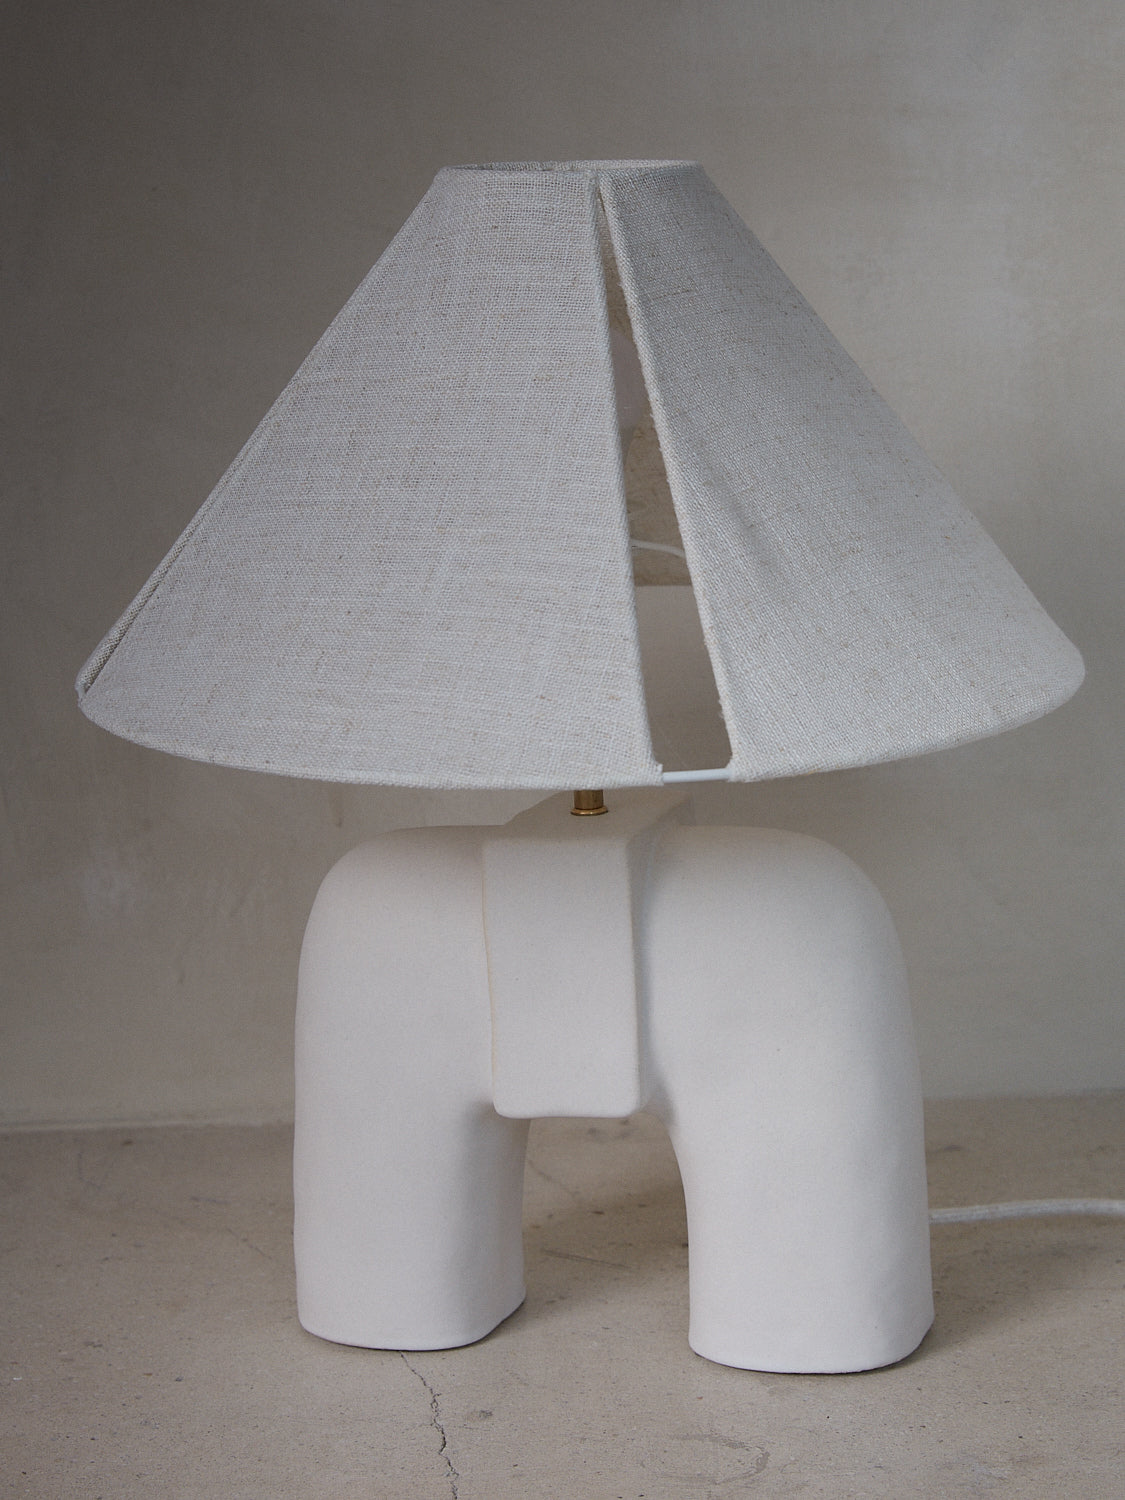 Handcrafted ceramic Audrey Table Lamp by Cuit Studio with linen lampshade in white.